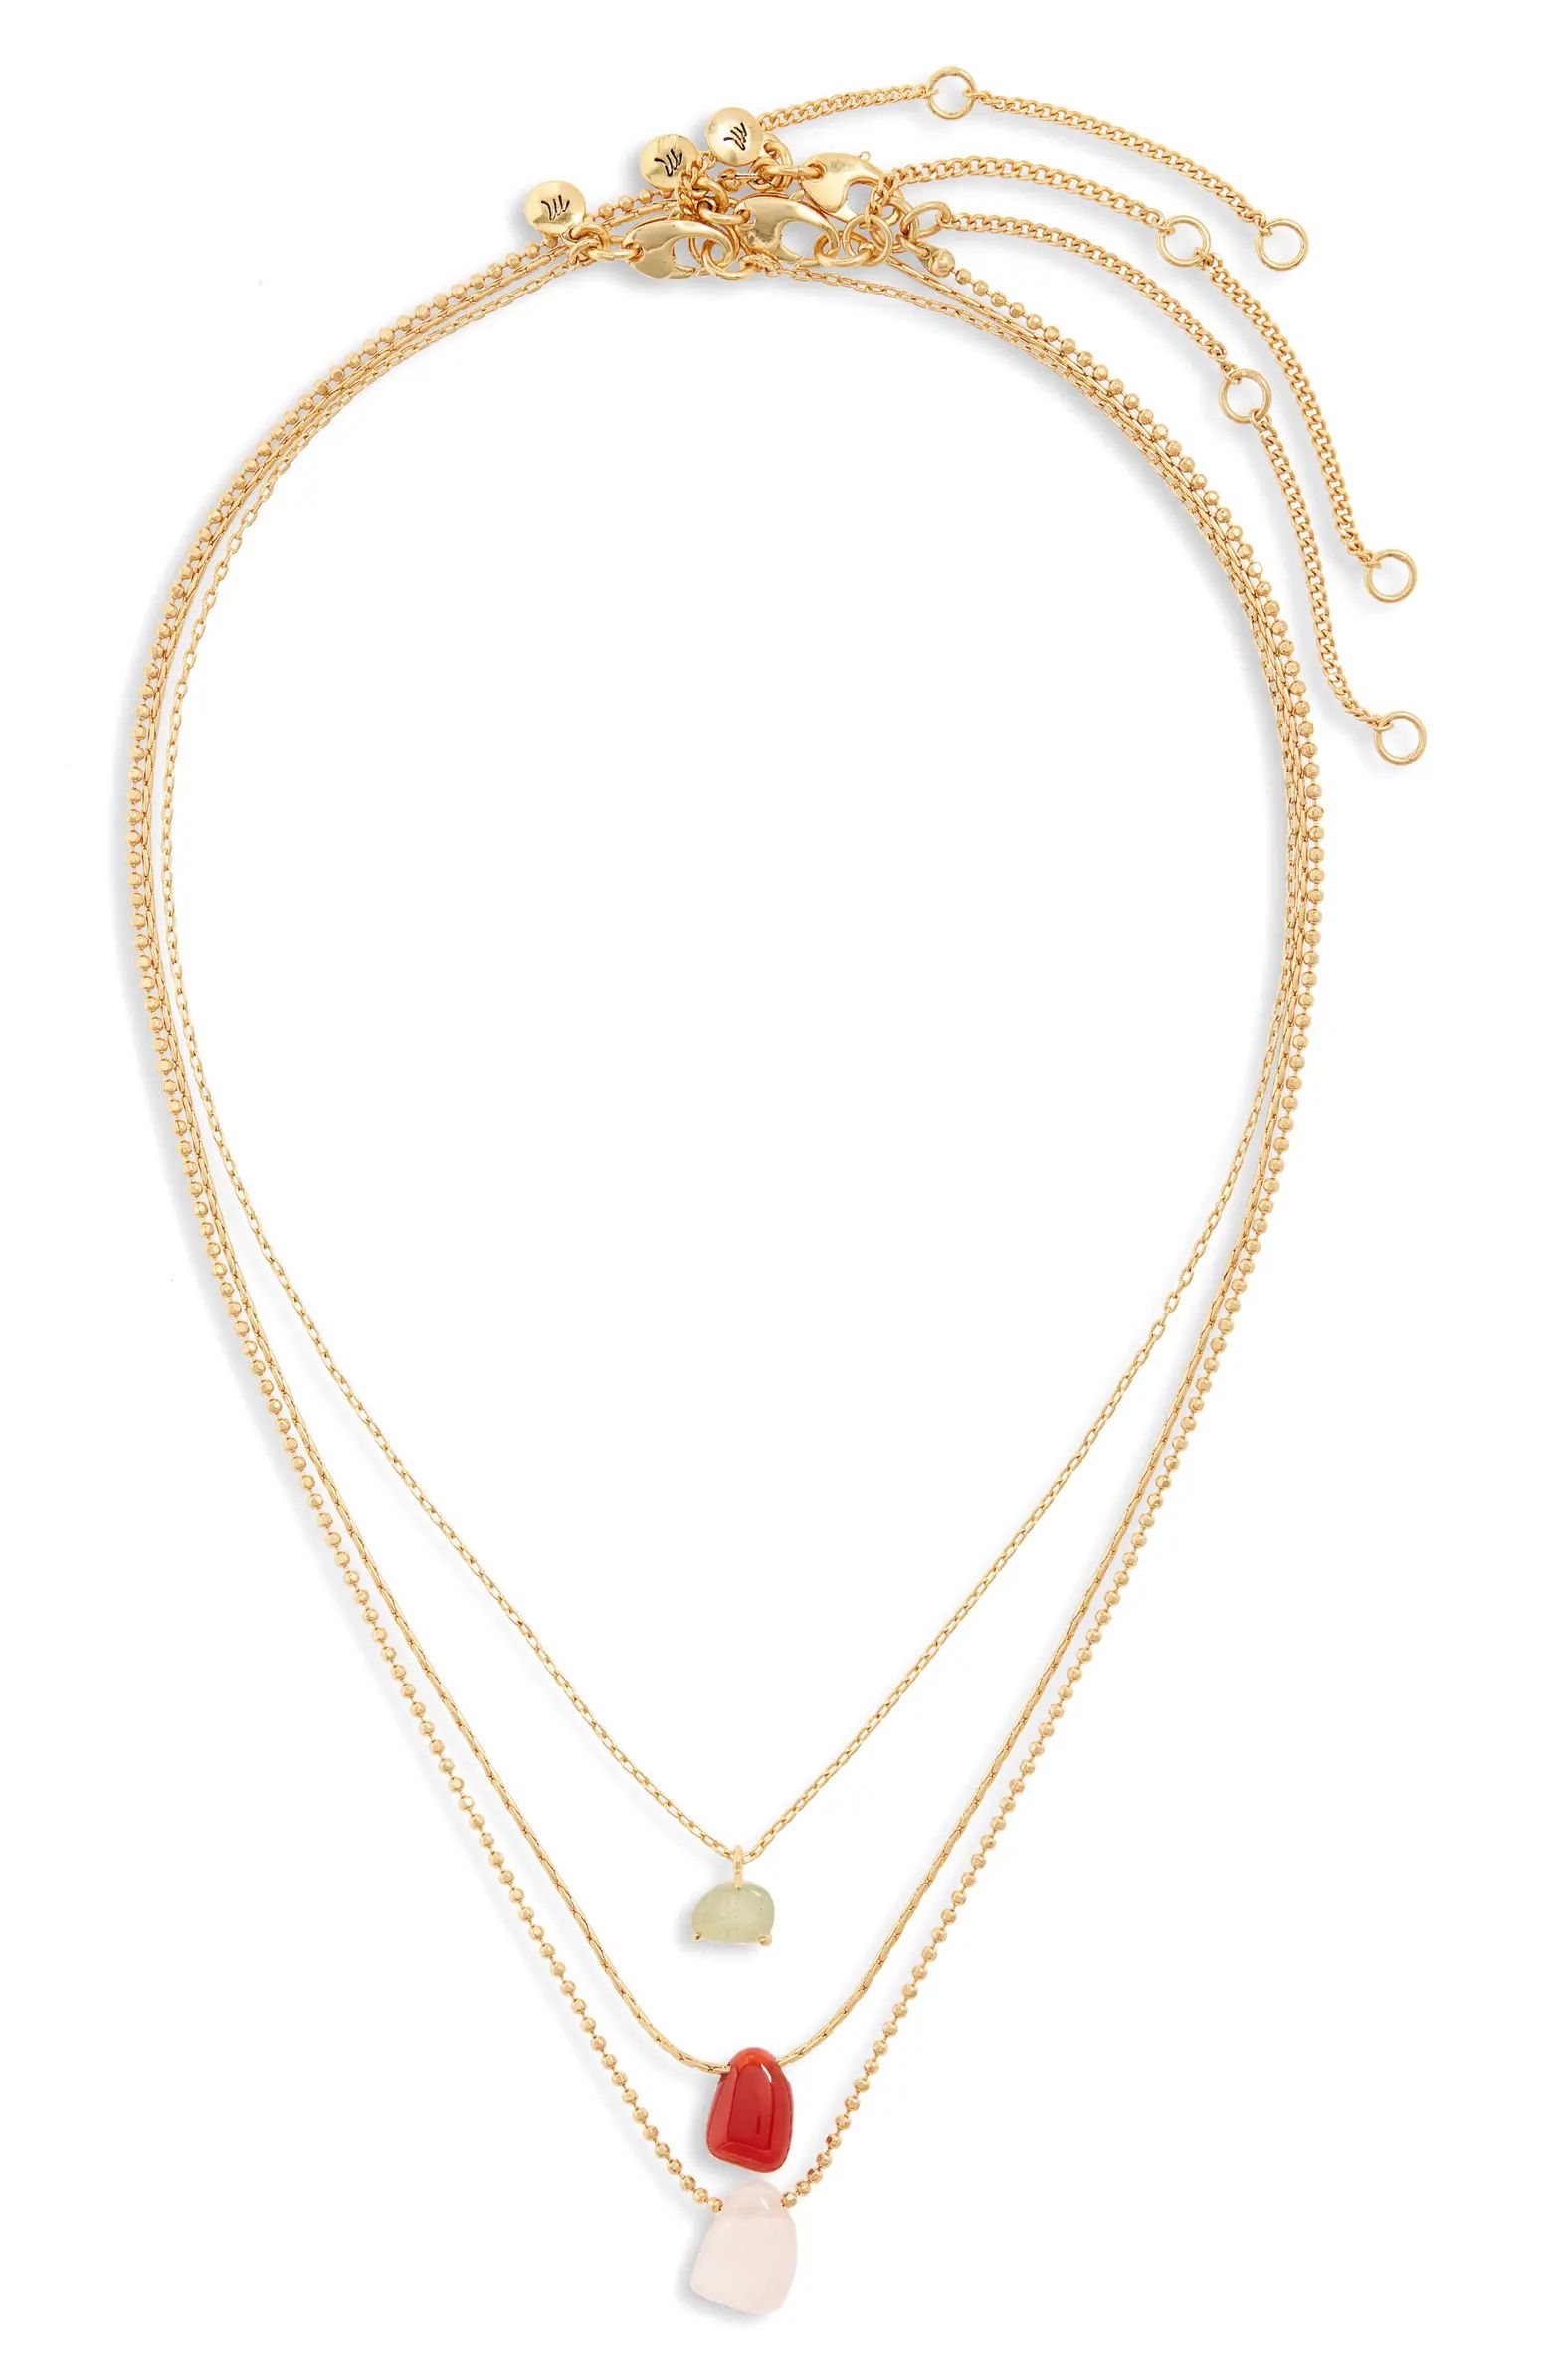 Stone Collection Set of 3 Necklaces | Nordstrom